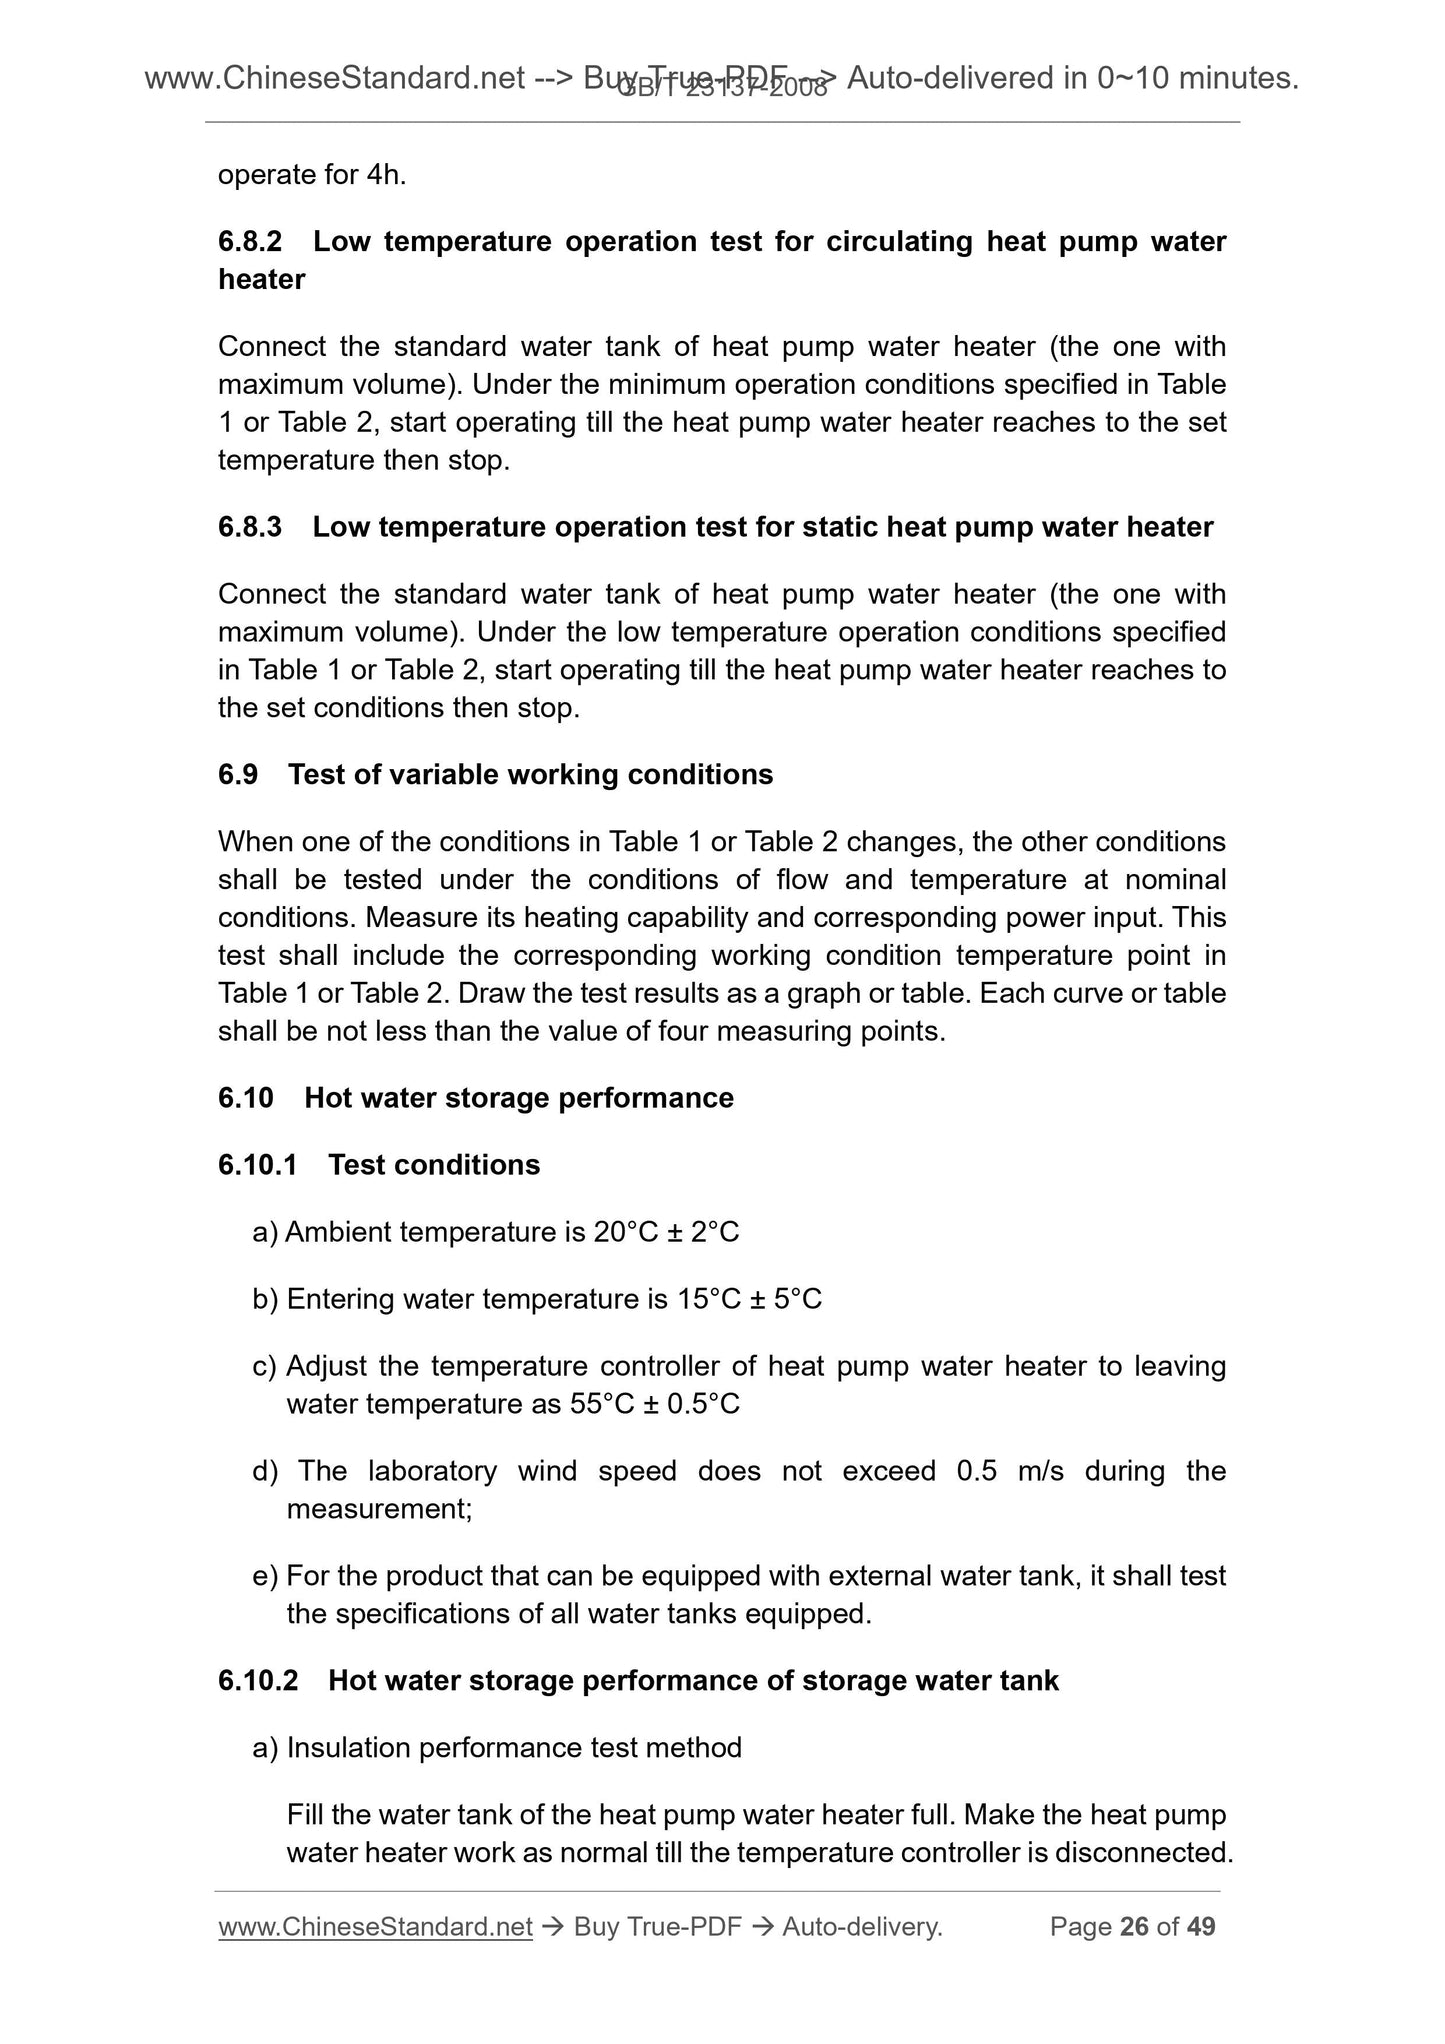 GB/T 23137-2008 Page 12